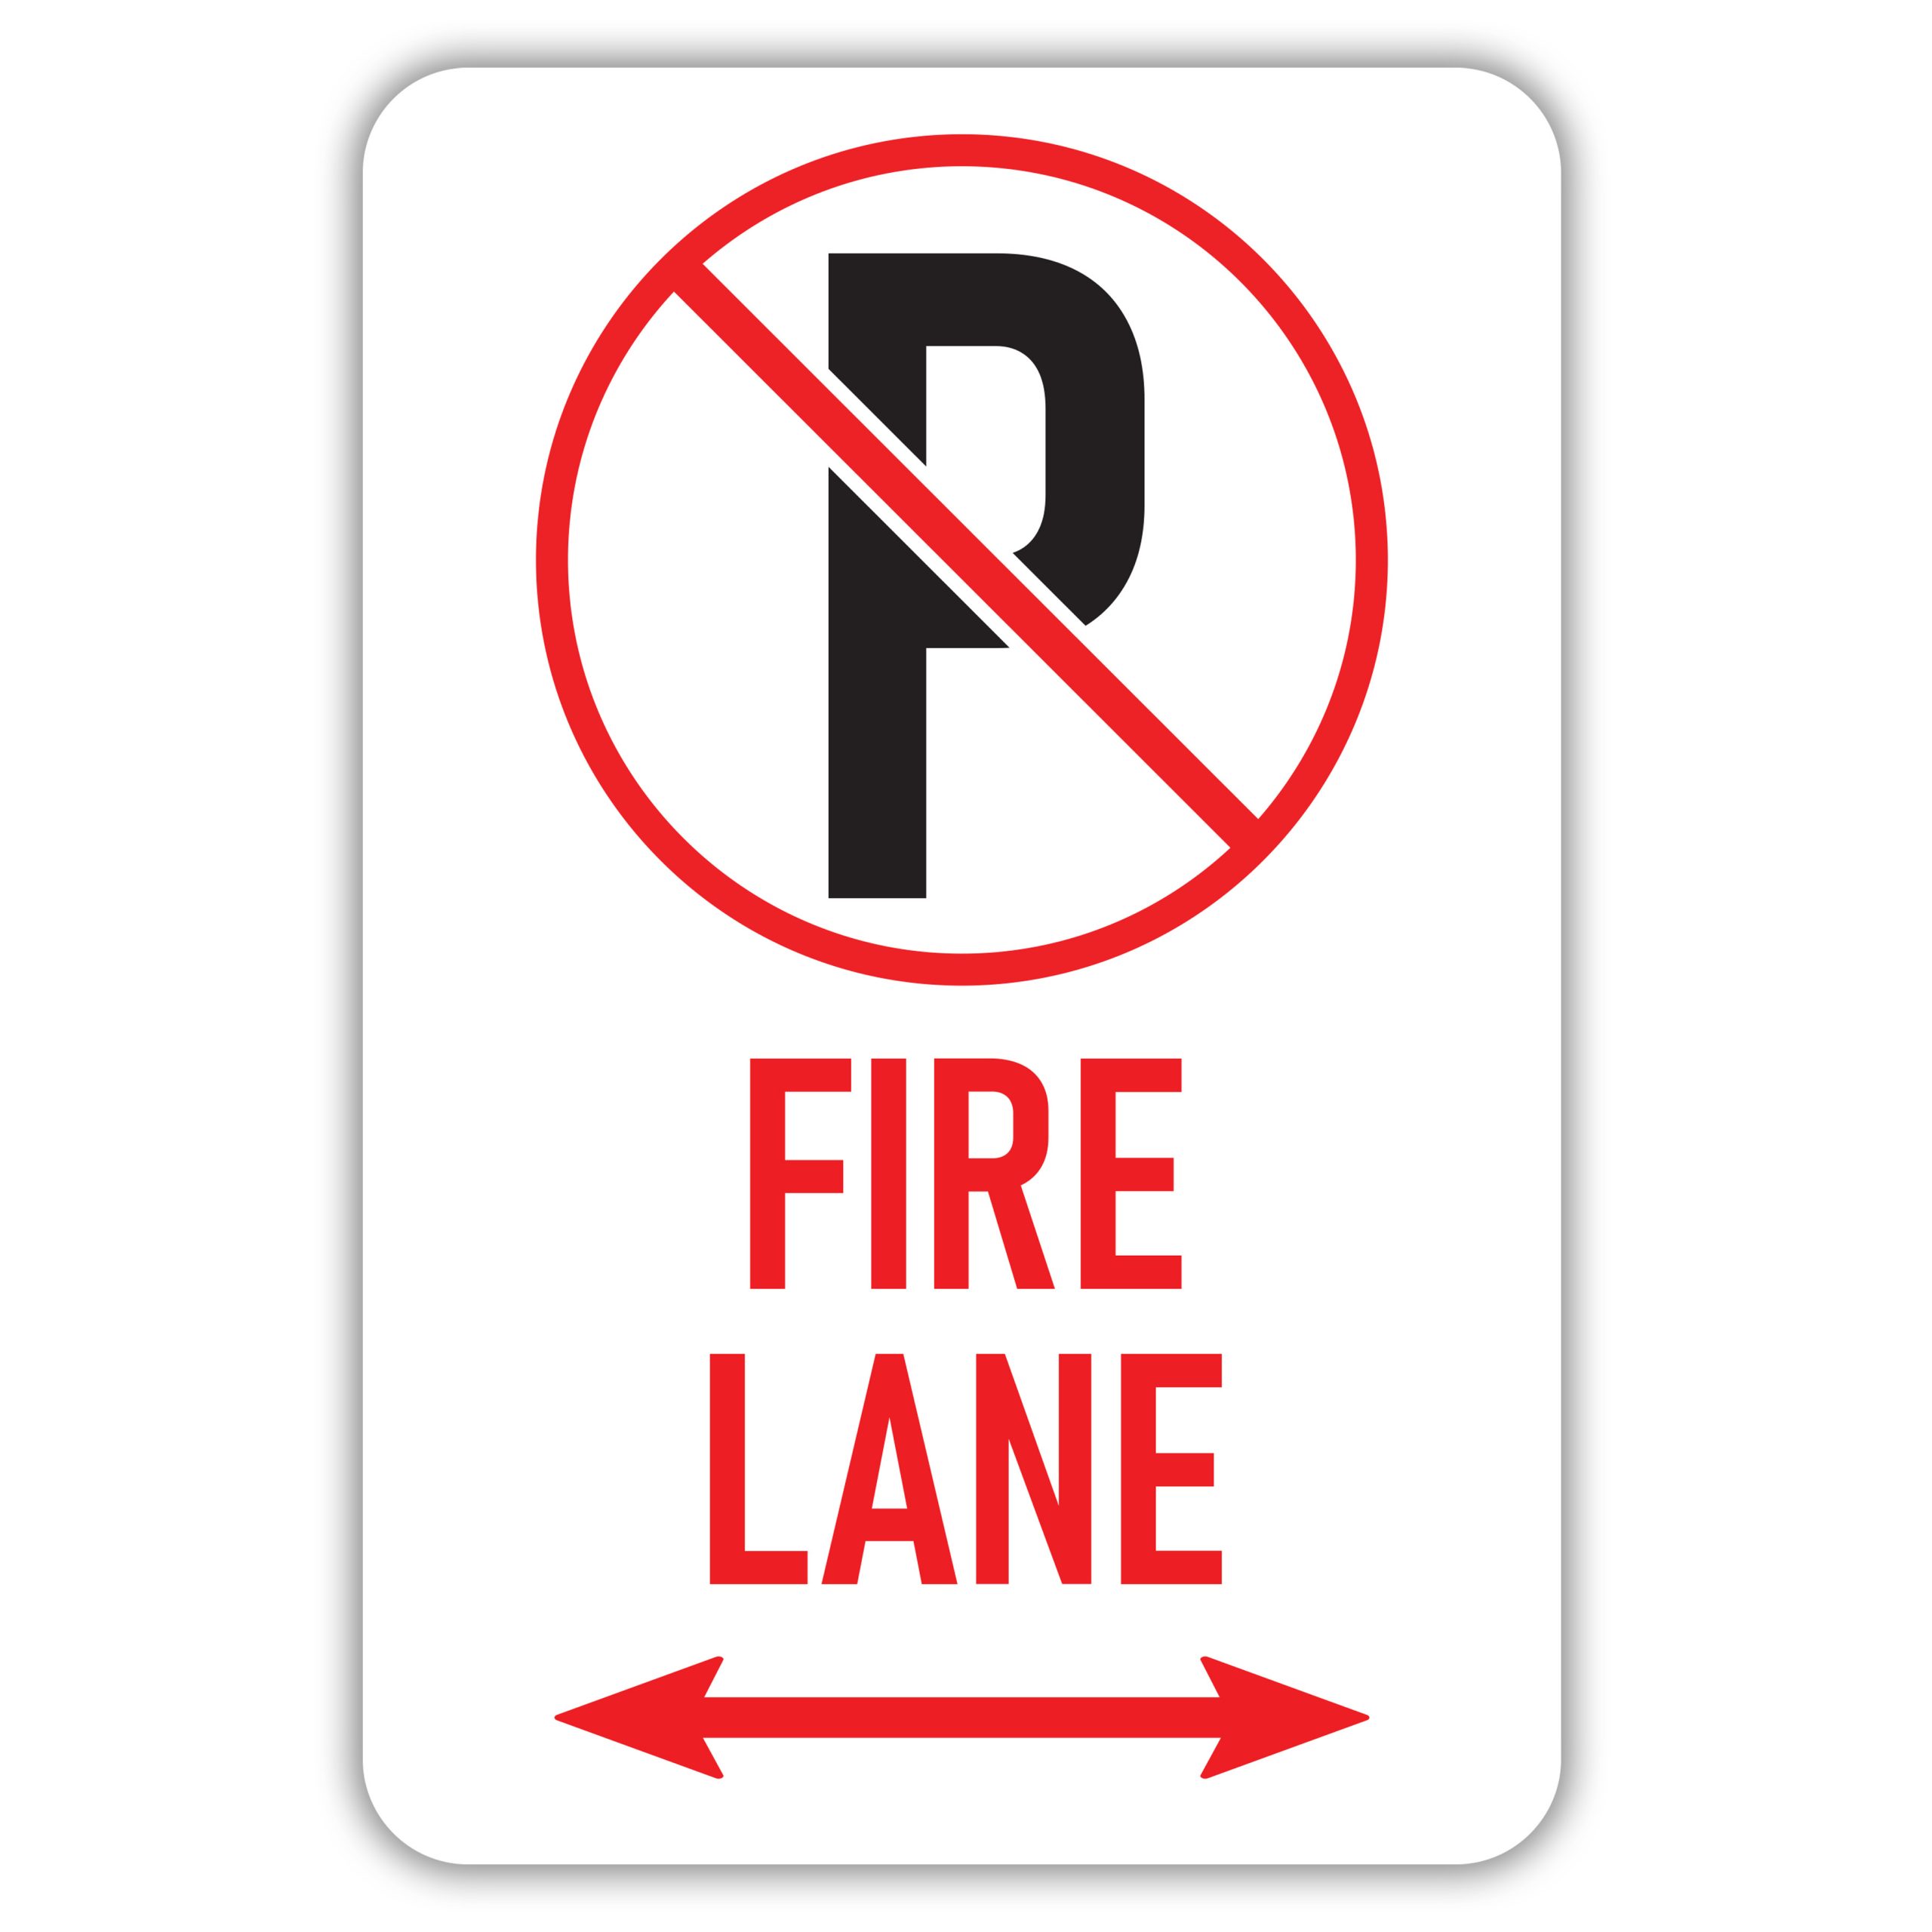 (NO PARKING) FIRE LANE - American Sign Company